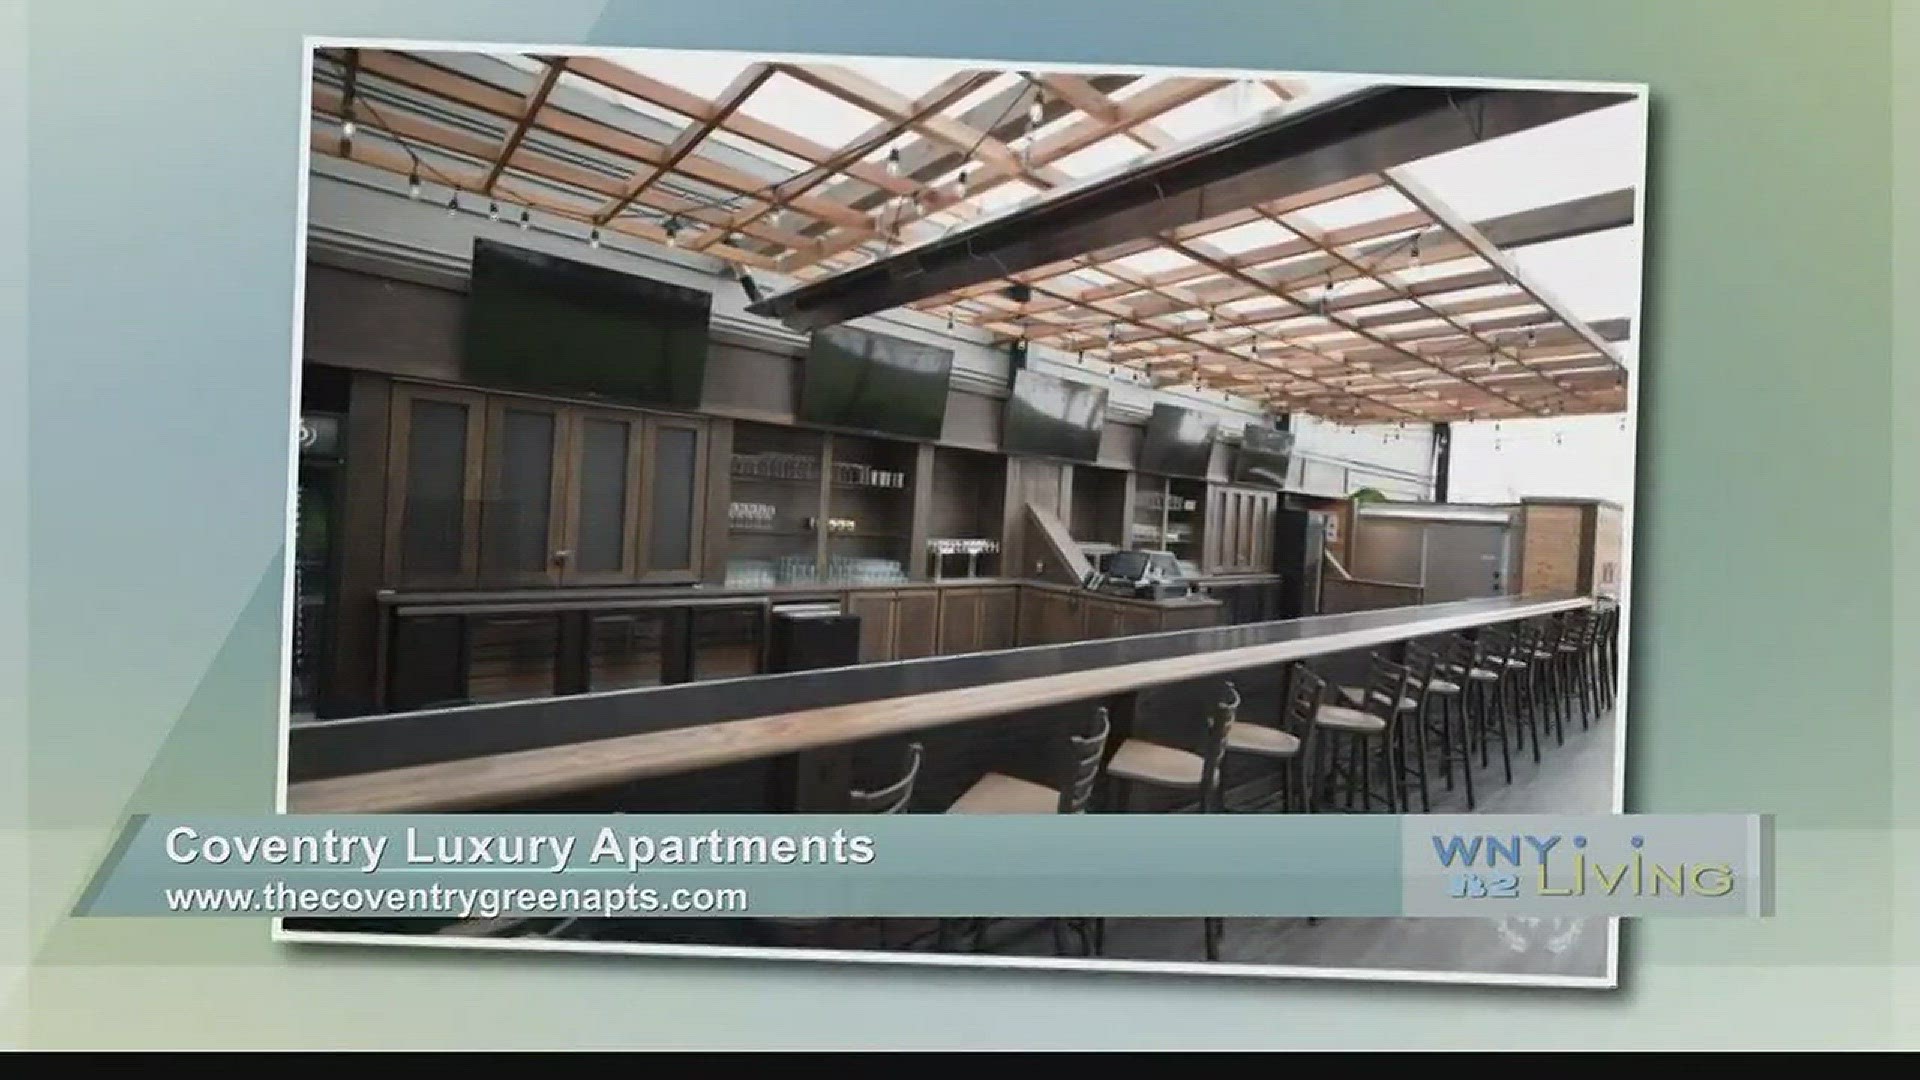 WNY Living - October 9 - Coventry Luxury Apartments